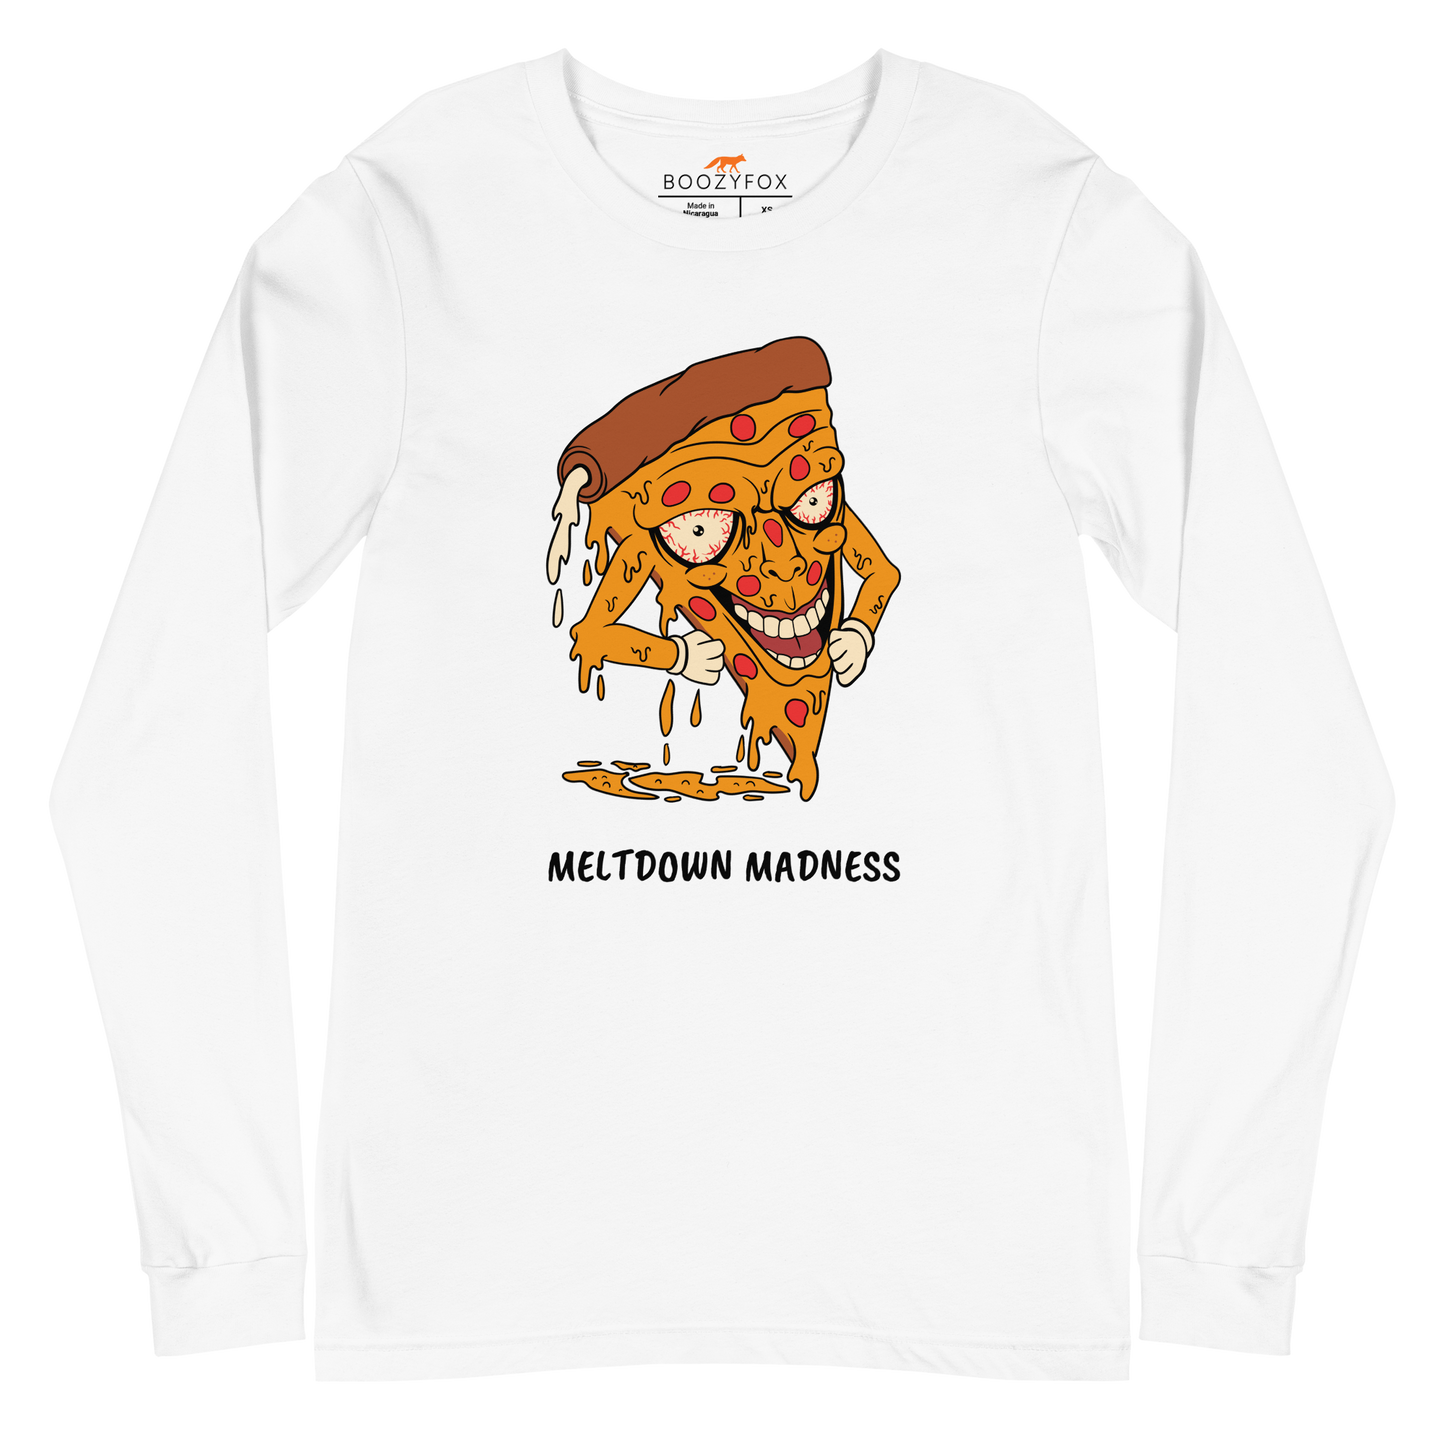 White Melting Pizza Long Sleeve Tee featuring a Meltdown Madness graphic on the chest - Funny Pizza Long Sleeve Graphic Tees - Boozy Fox